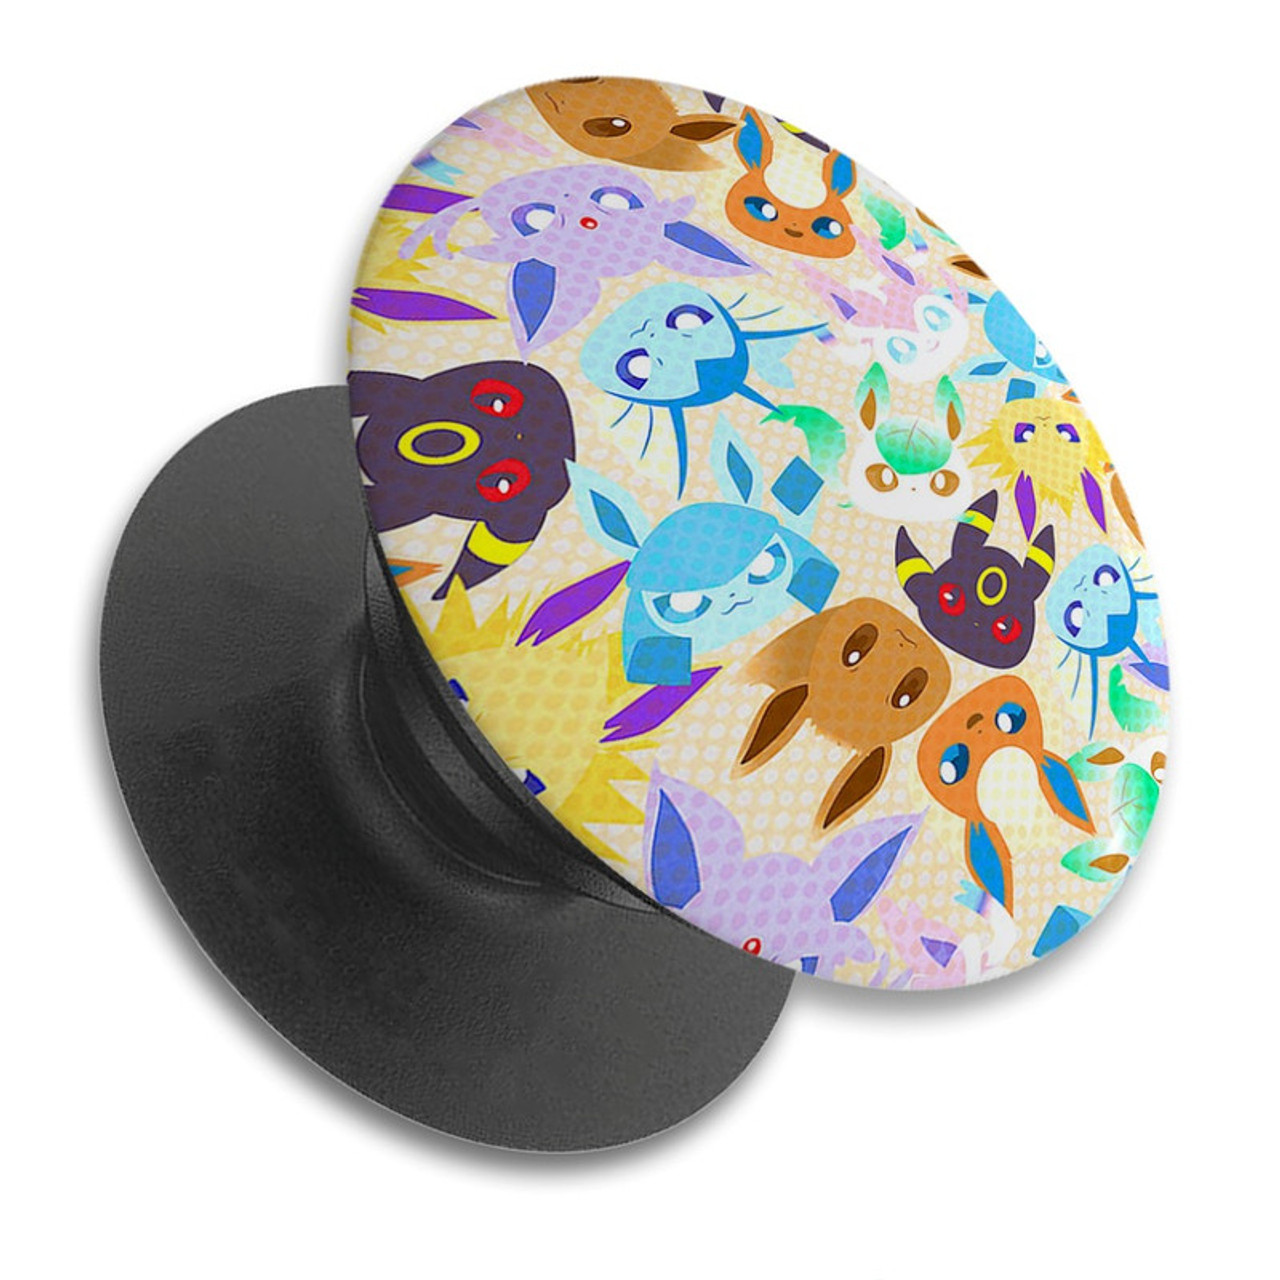 Pastele Chloe Surprise Custom PopSockets Awesome Personalized Phone Grip  Holder Pop Up Stand Out Mount Grip